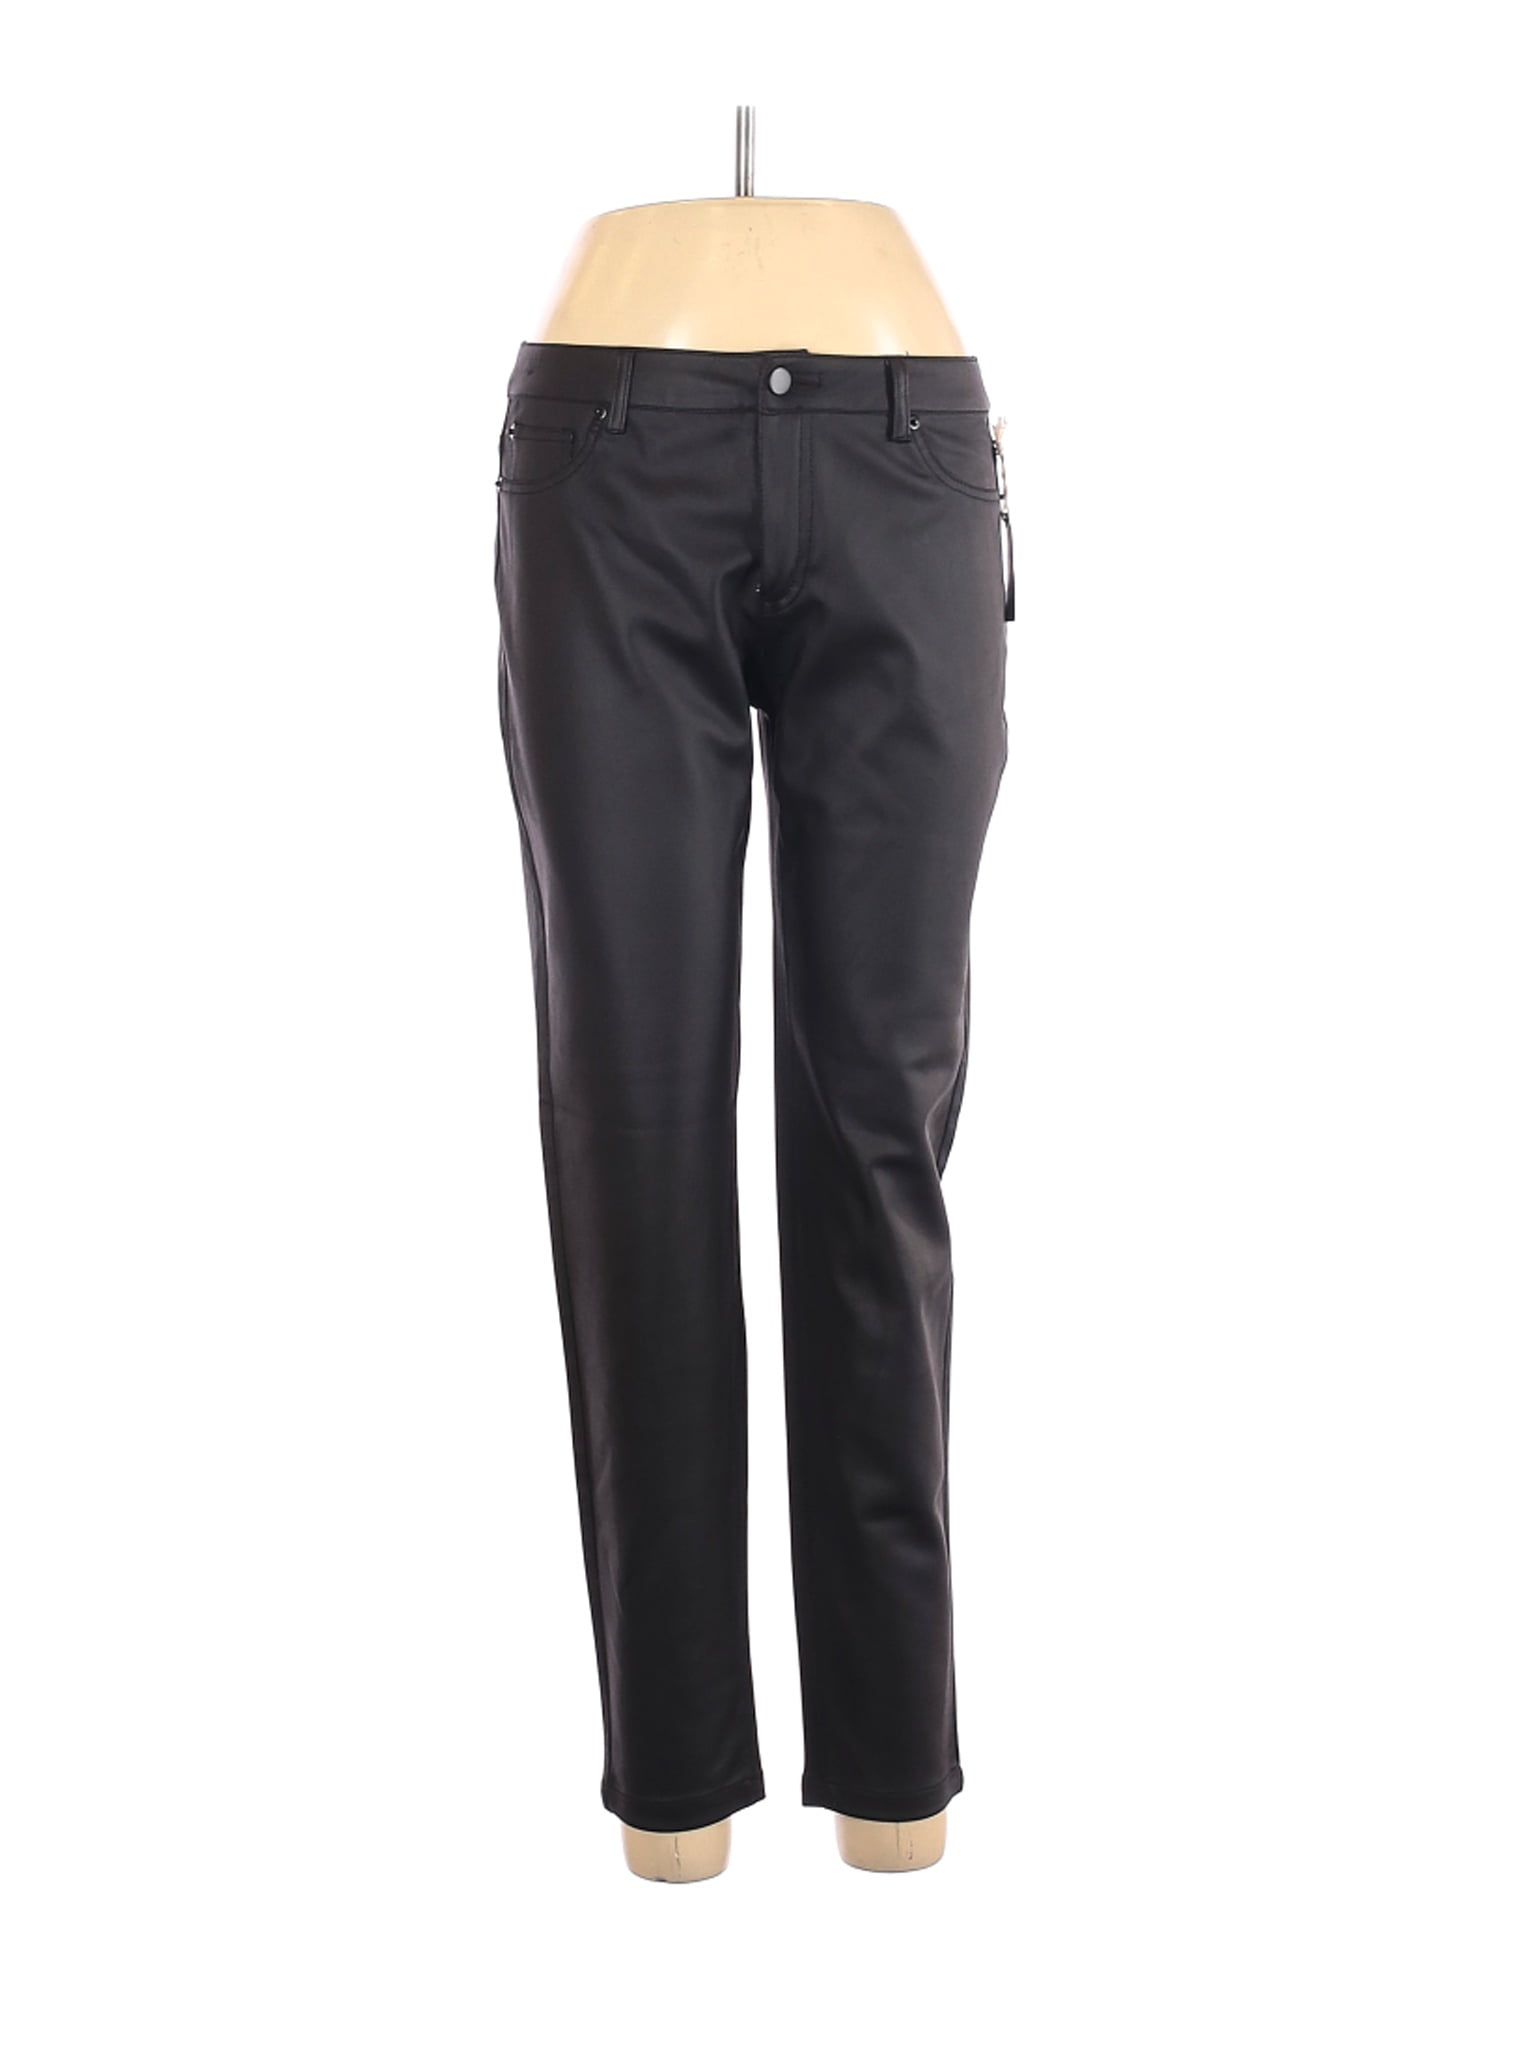 forever 21 women's leather pants